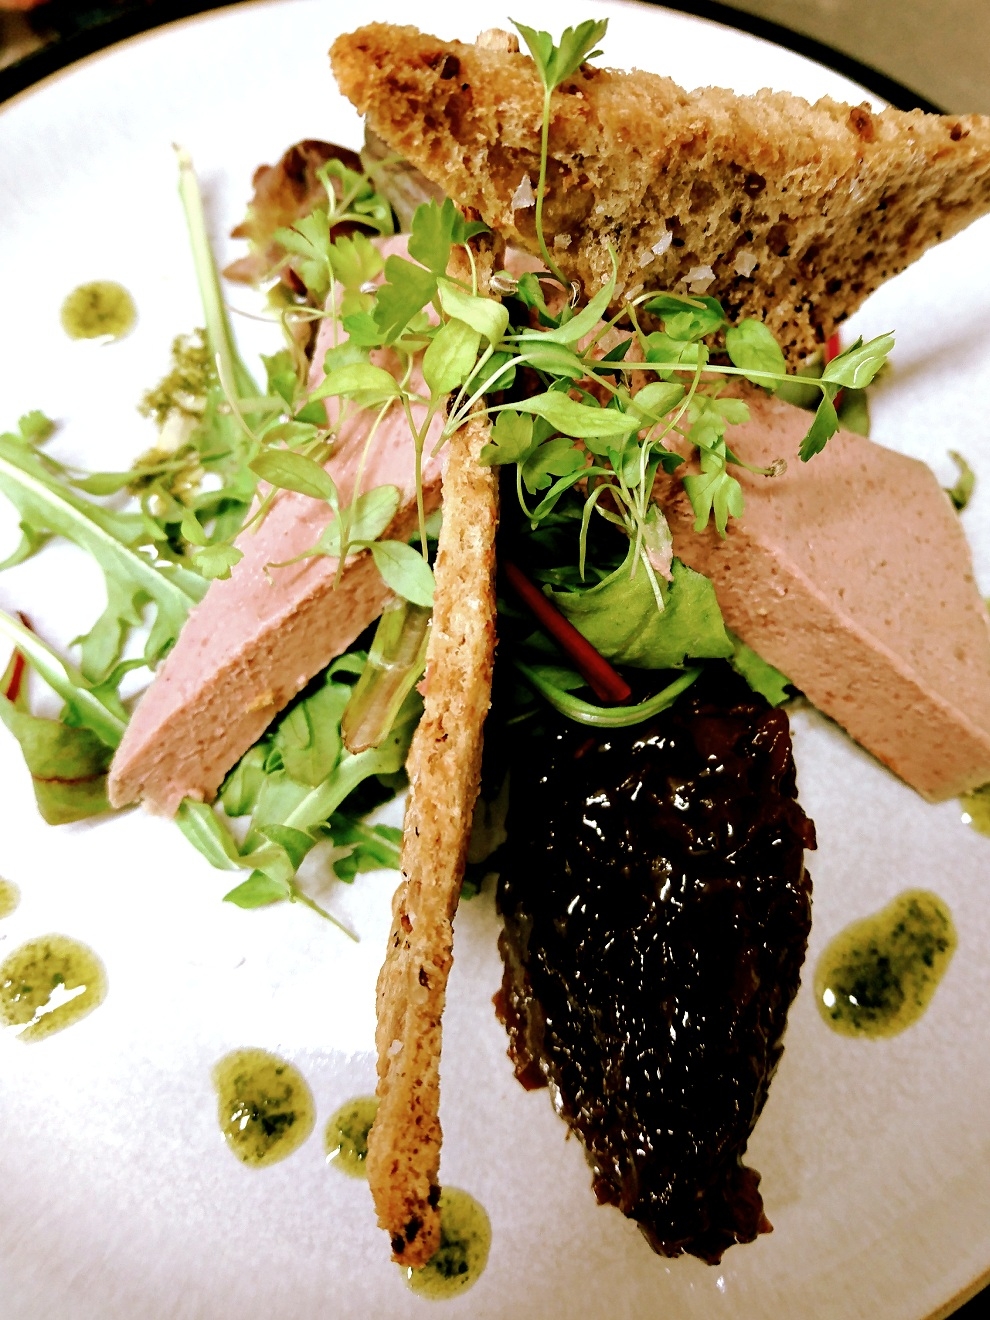 Chicken & duck liver parfait on bed of rocket, red onion marmalade basil oil, homemade rye wafers